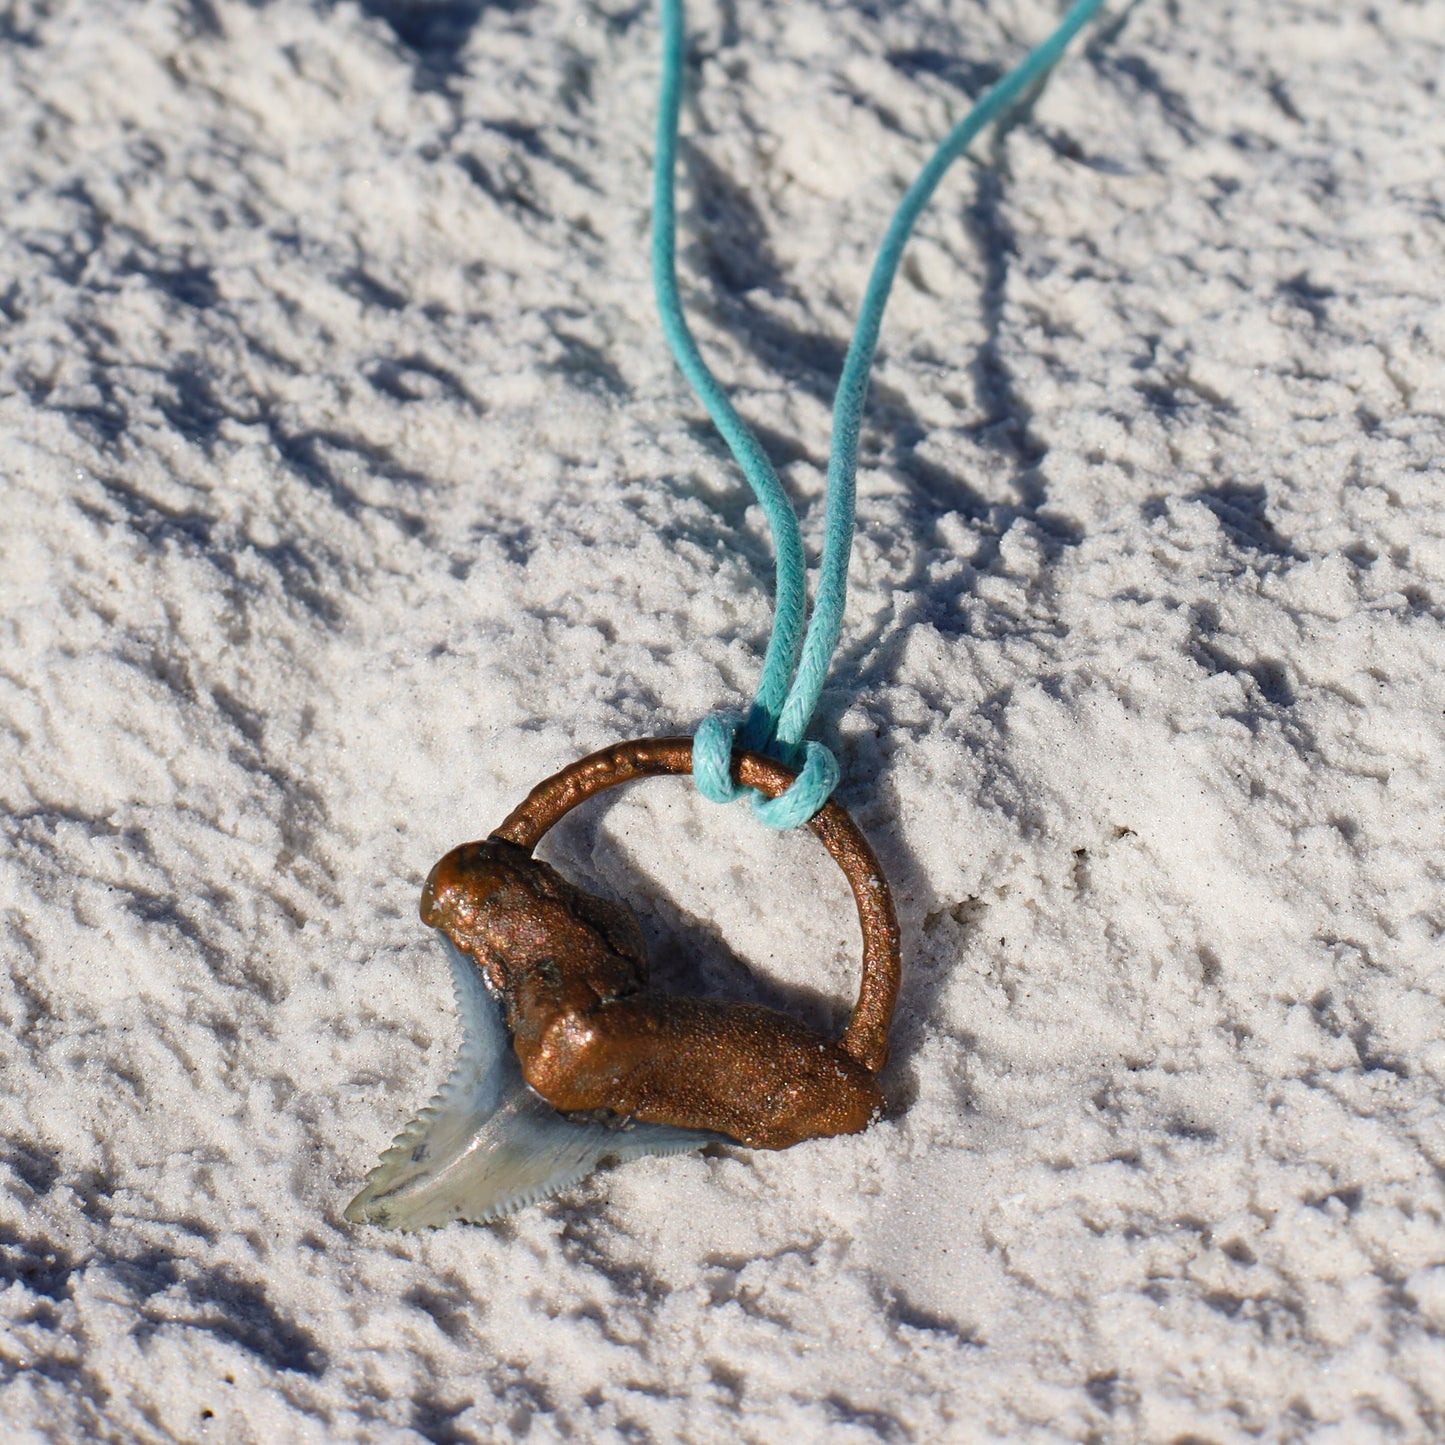 Hemi/Snaggletooth Florida Fossil Shark Tooth Copper Pendant Necklace